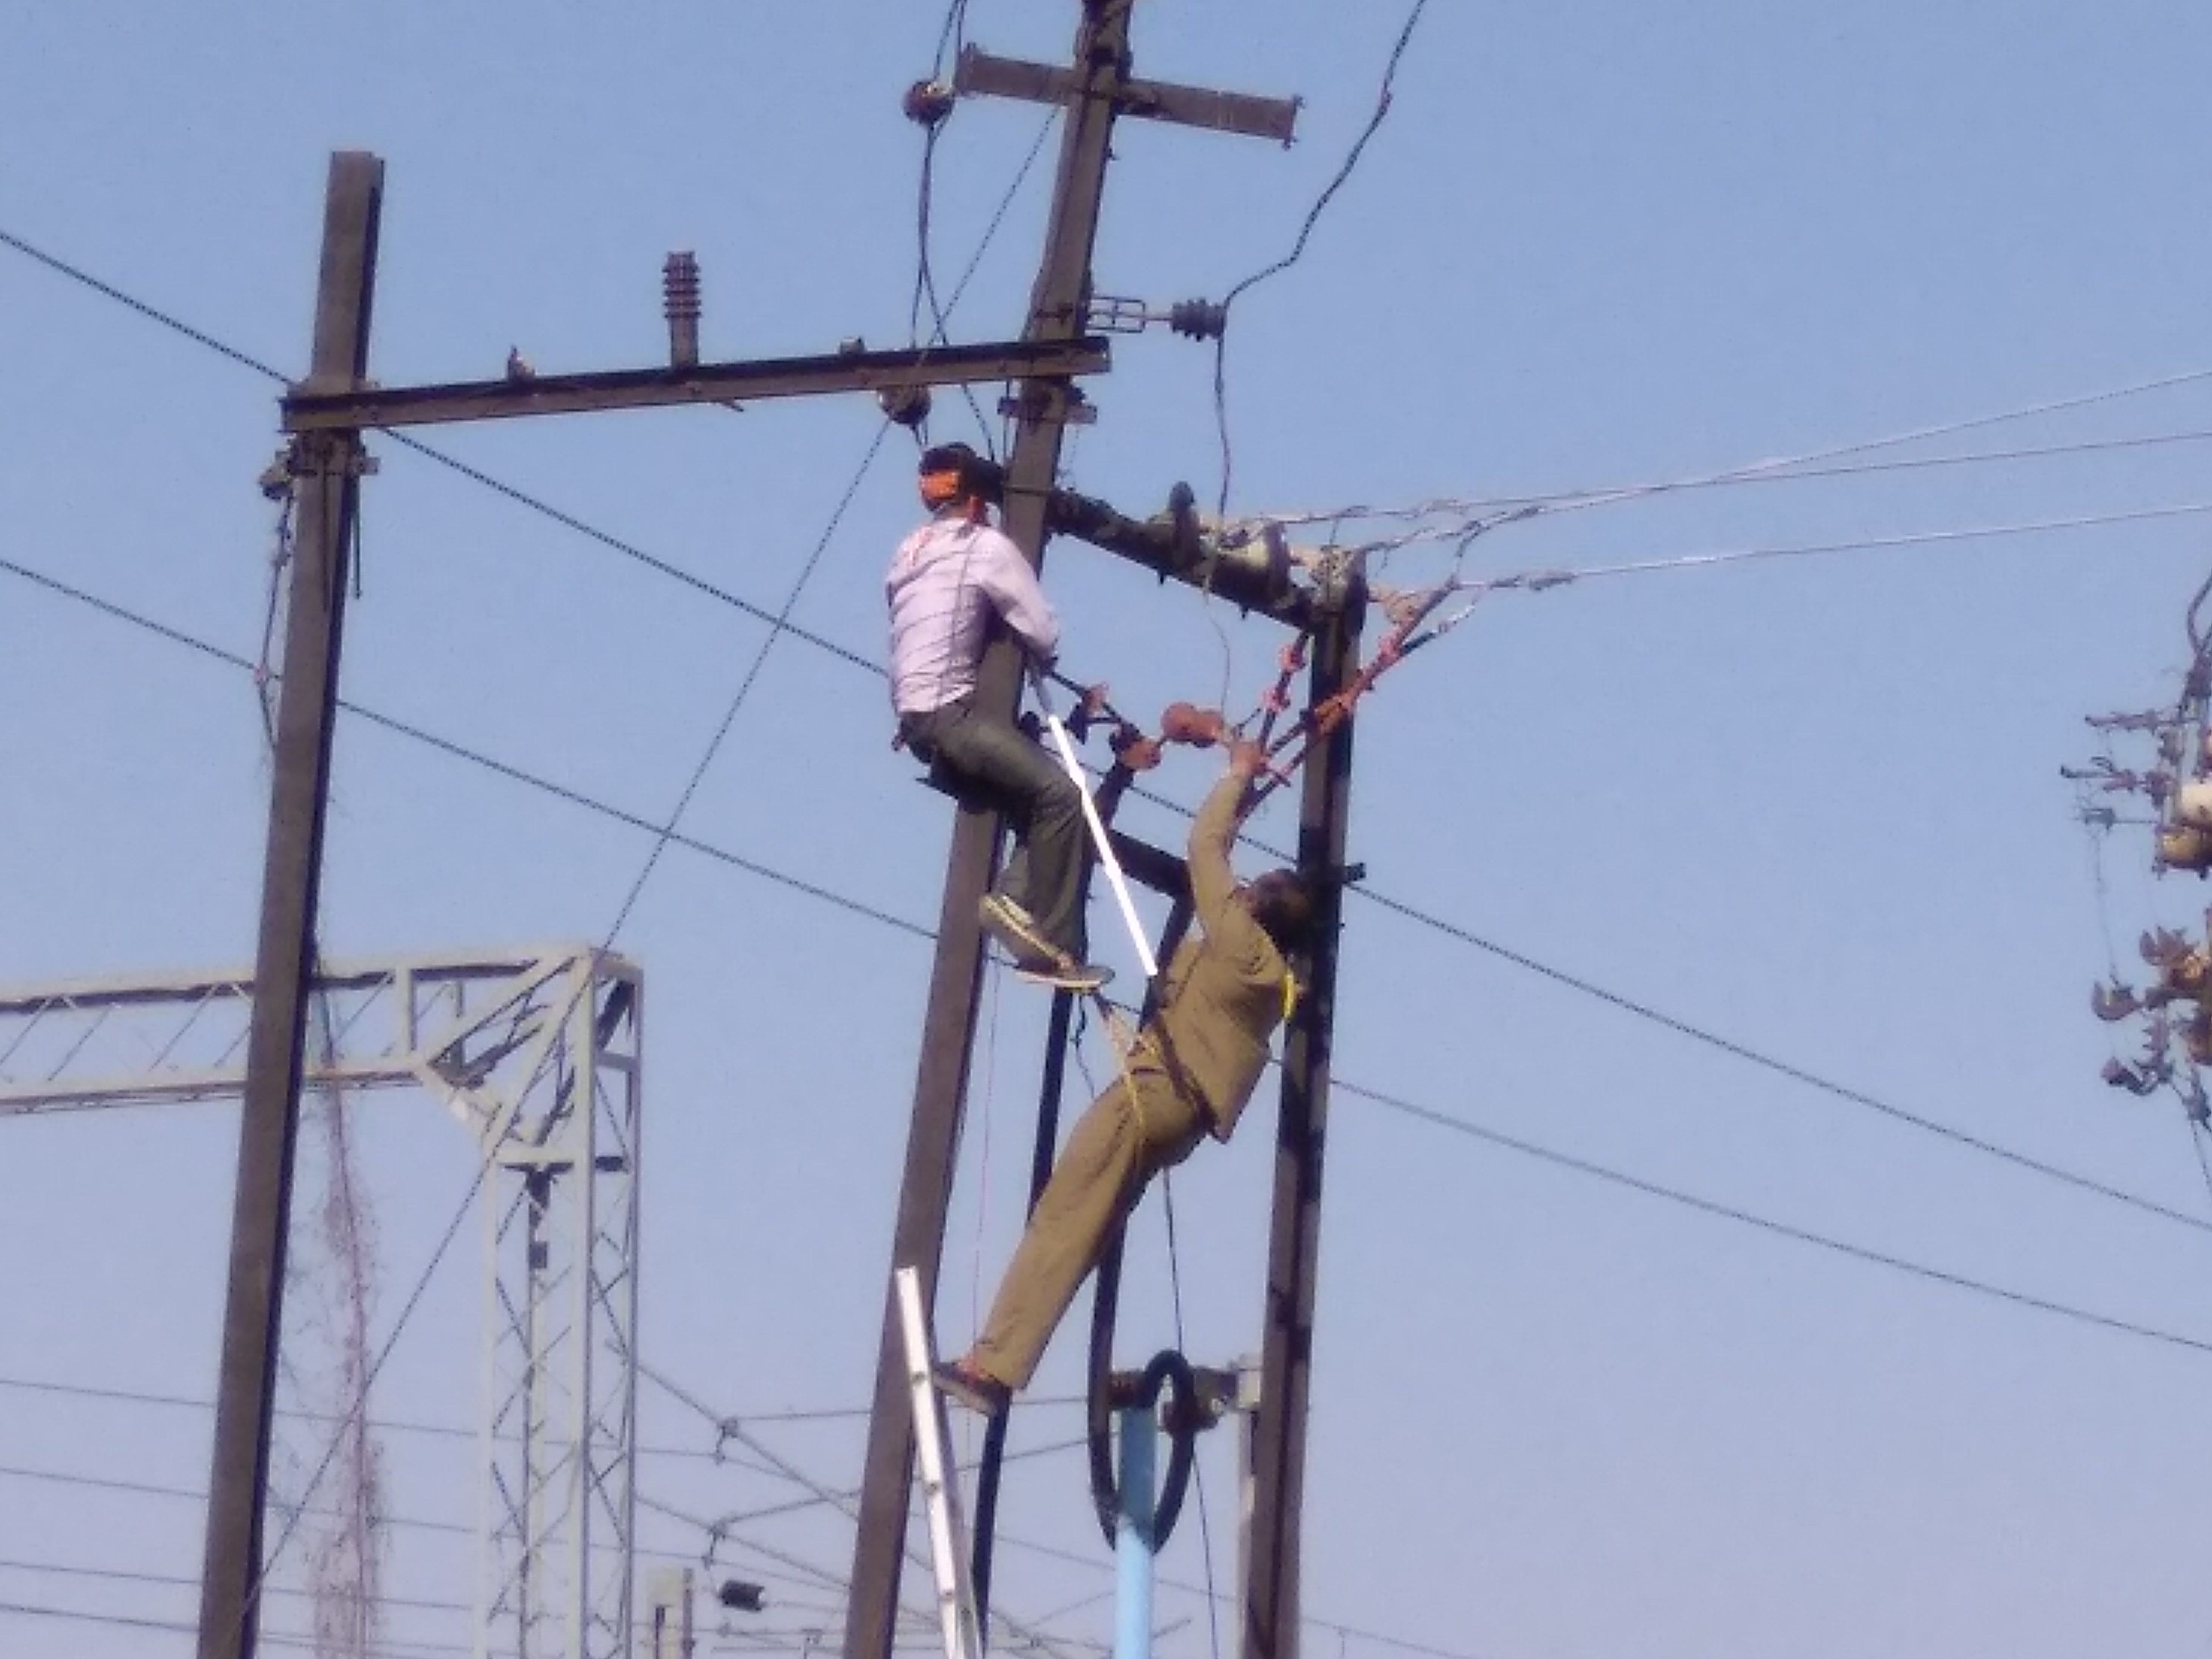 Continuous failure in electrical equipment, power is going off every d